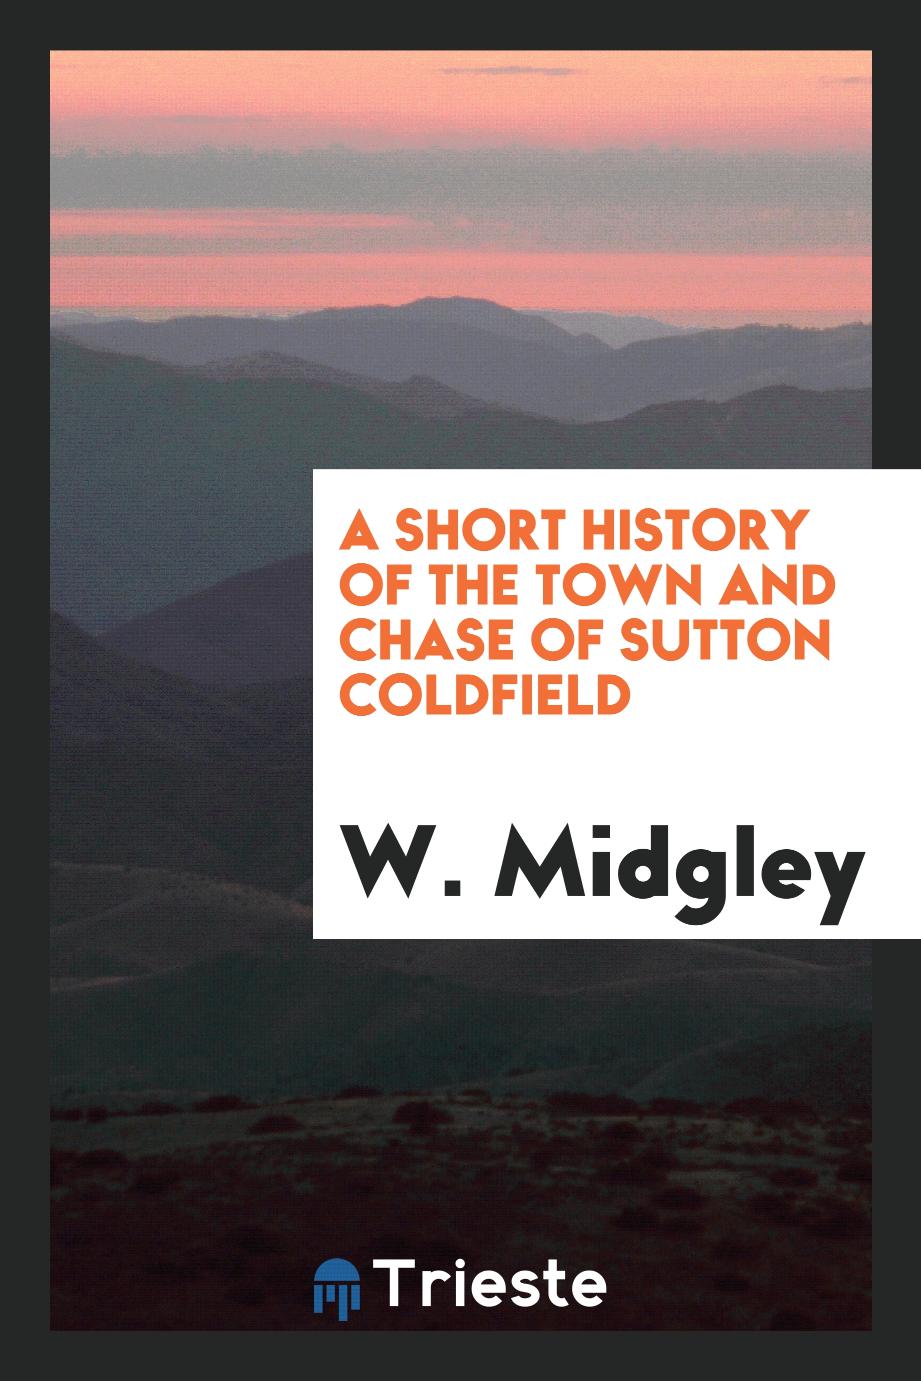 A Short History of the Town and Chase of Sutton Coldfield